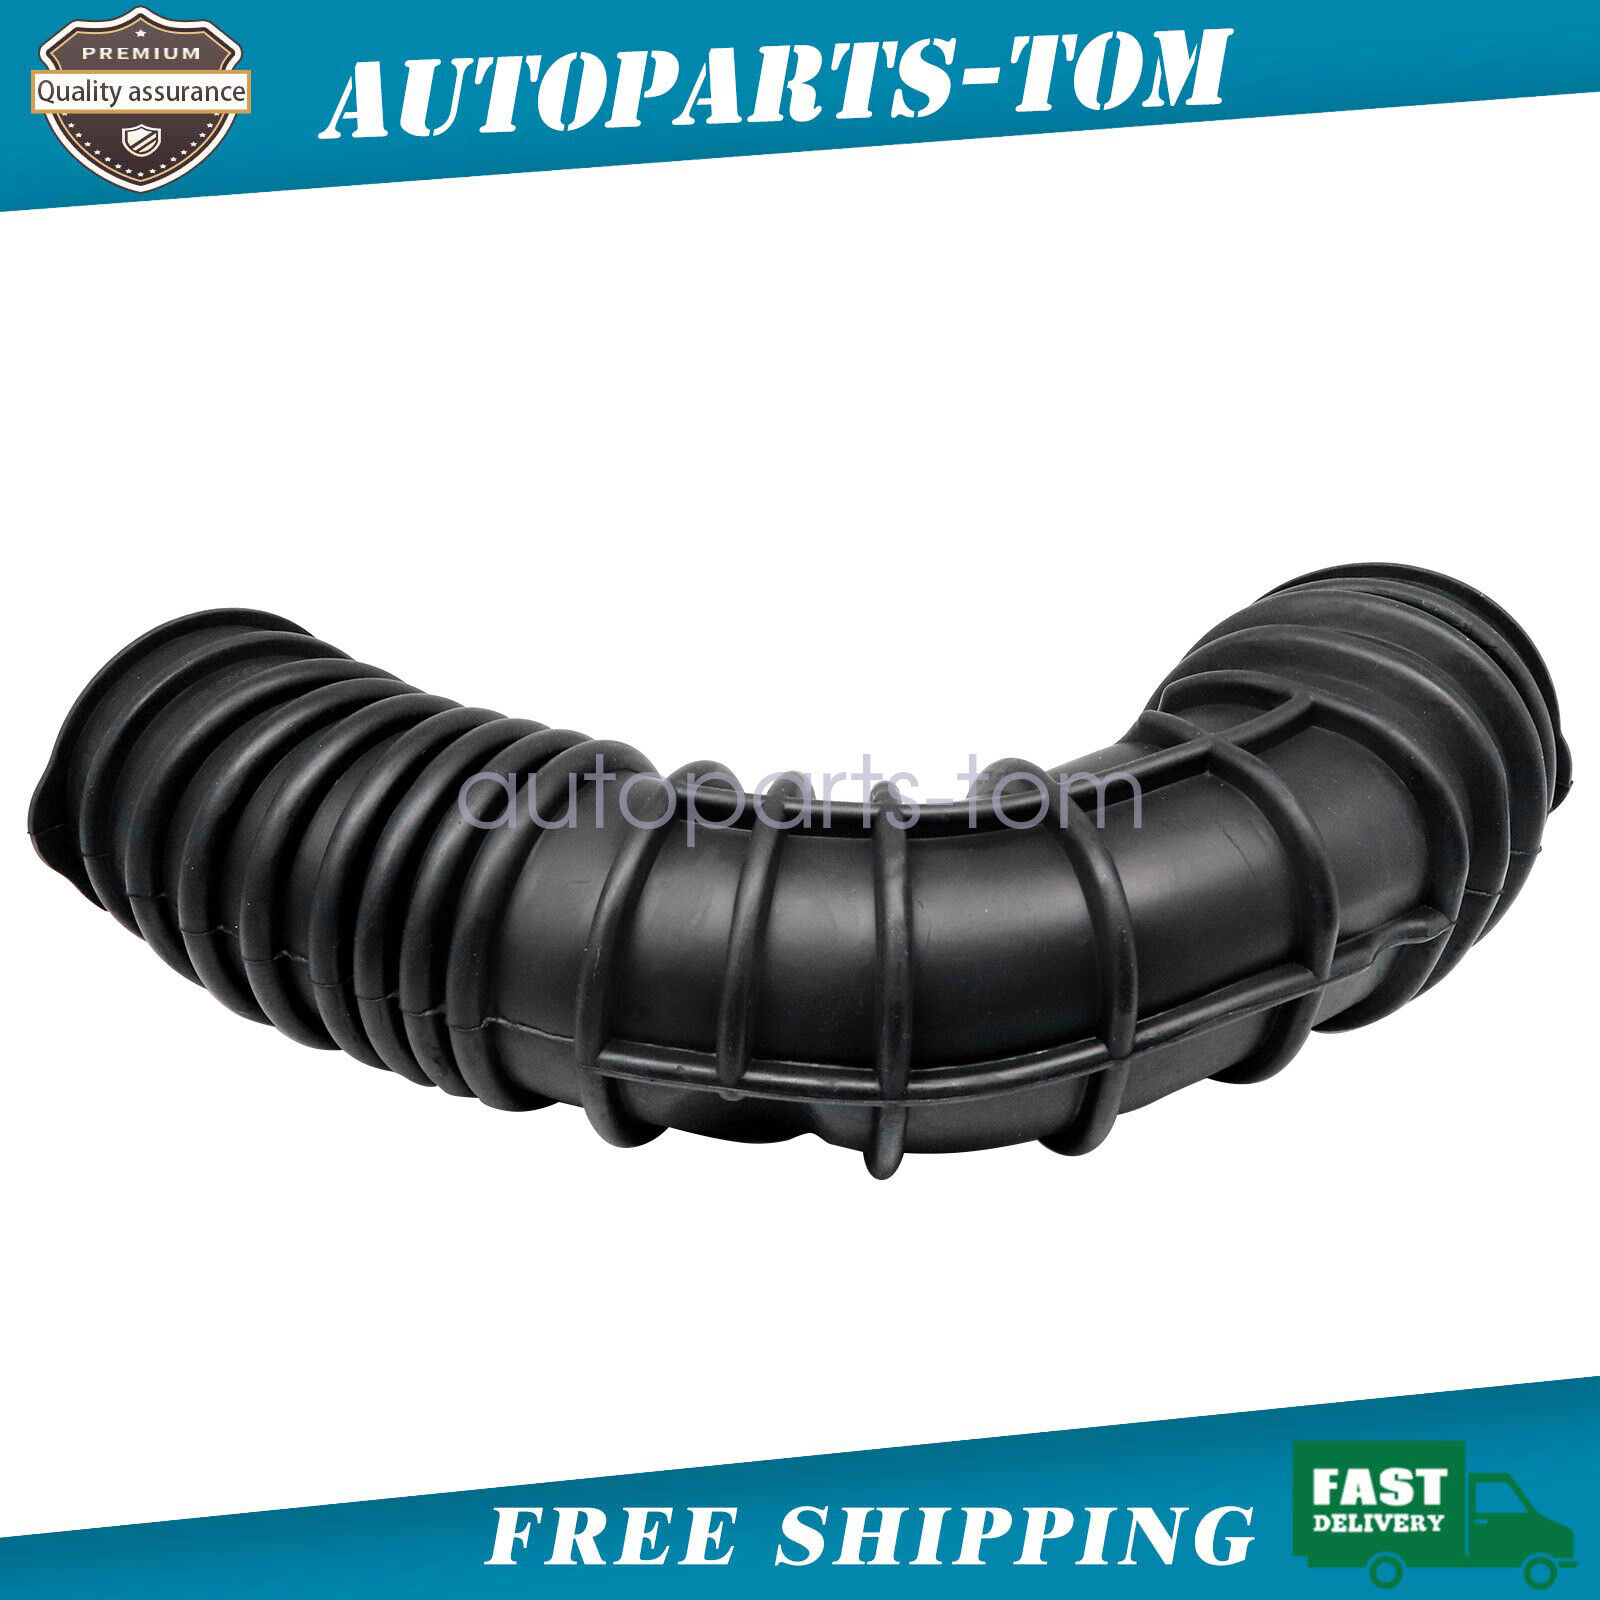 New Air Takeover Intake Pipe Filter Hose fit for Buick Regal 2009-2013 22951182